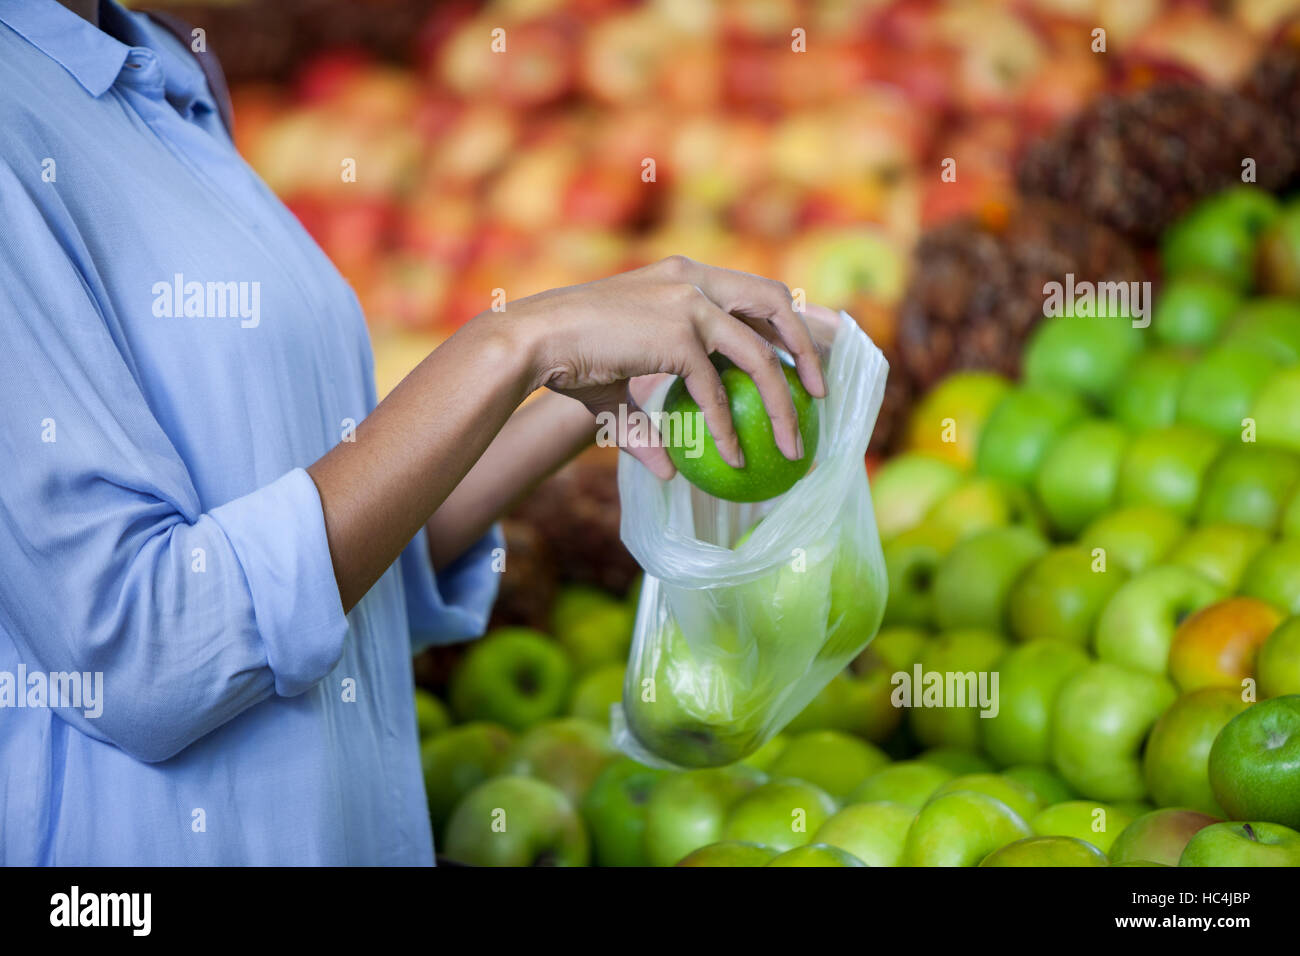 Woman buying an apple Stock Photo